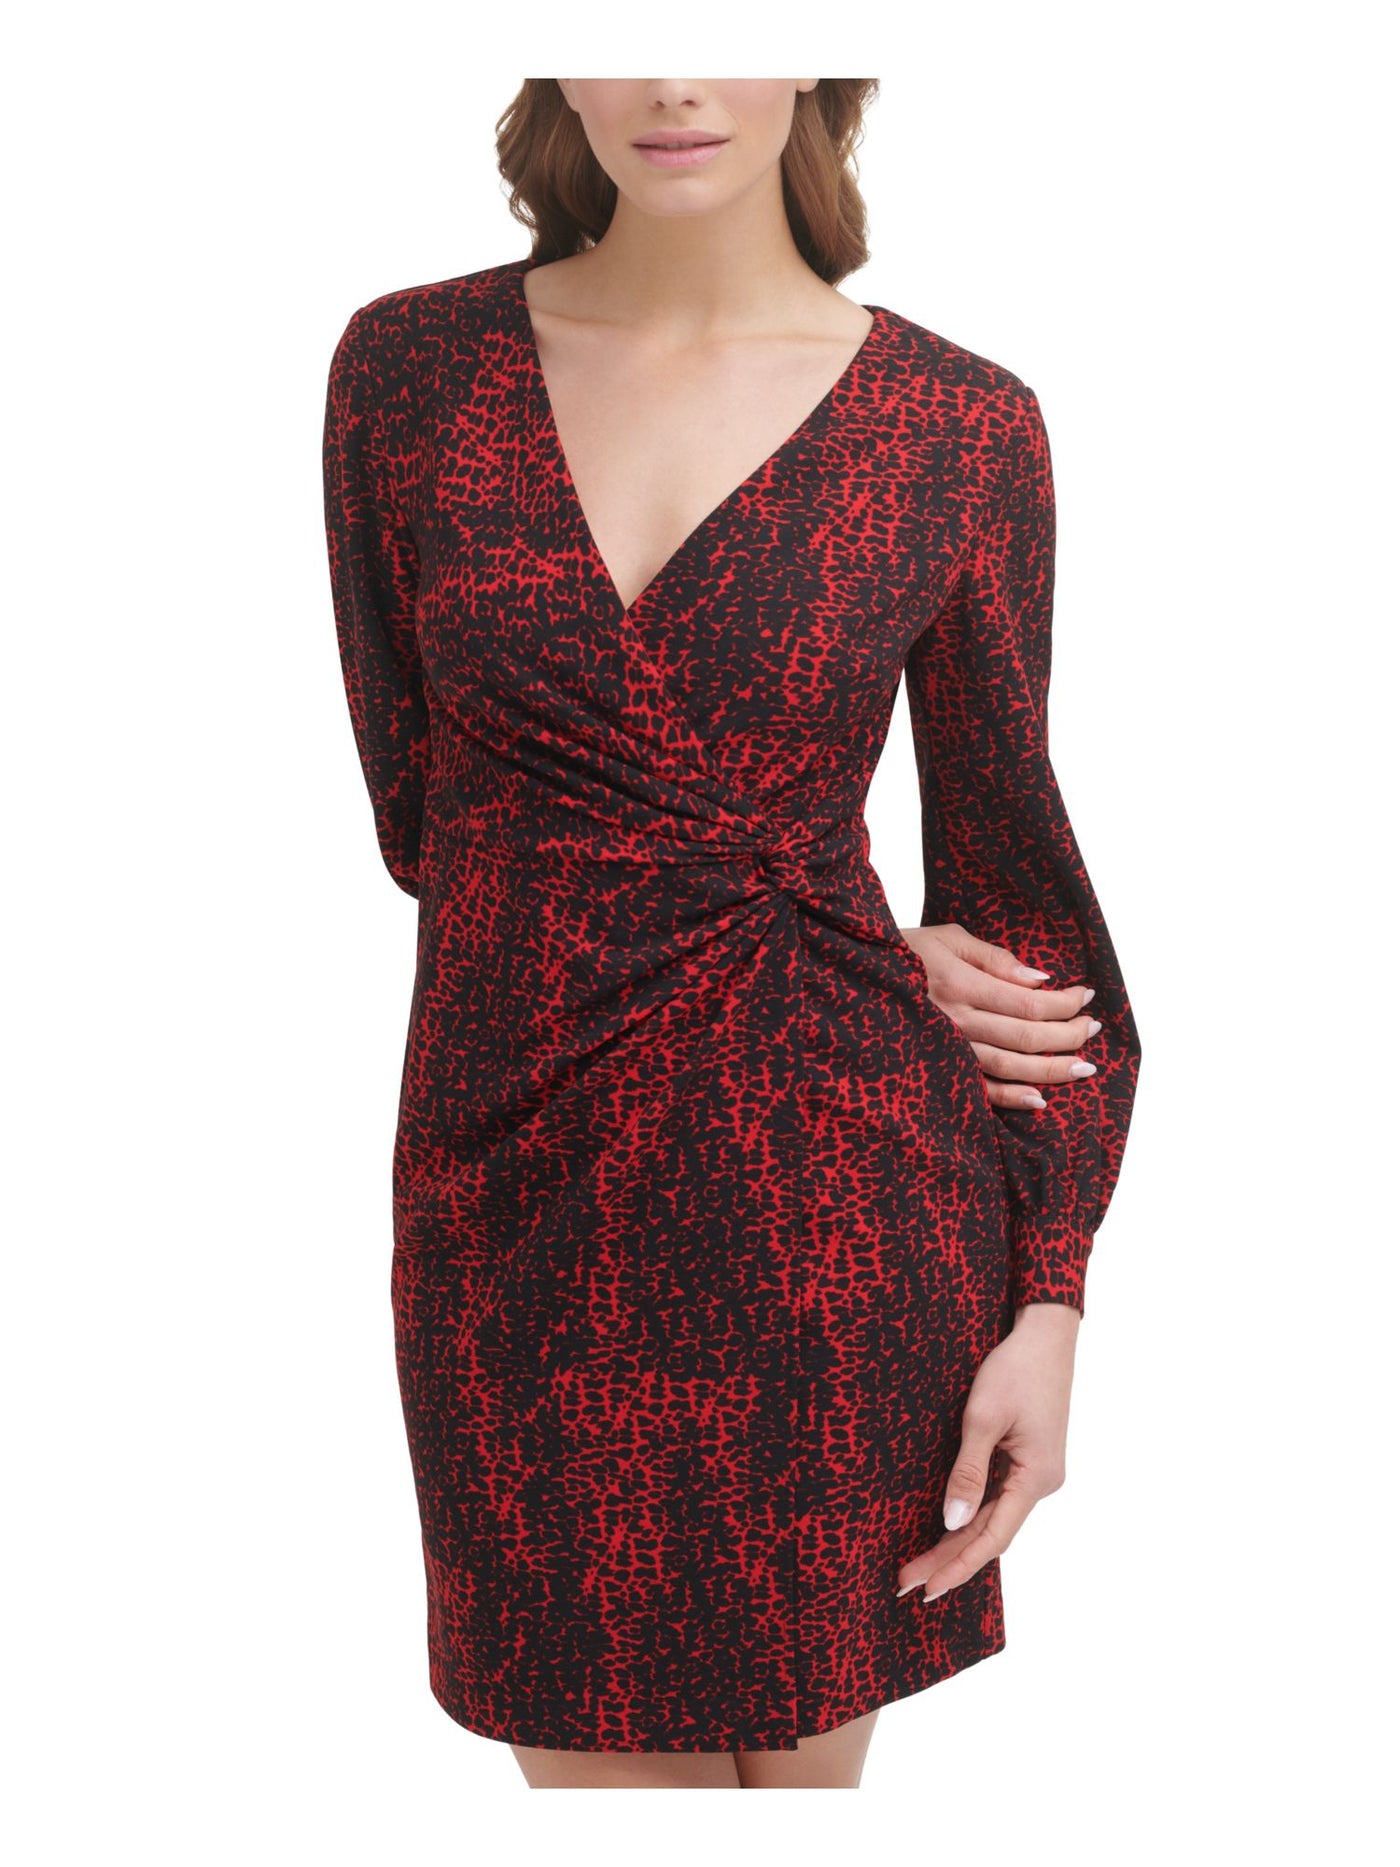 DKNY Womens Red Zippered Twist Front Printed Long Sleeve Surplice Neckline Above The Knee Party Faux Wrap Dress 8